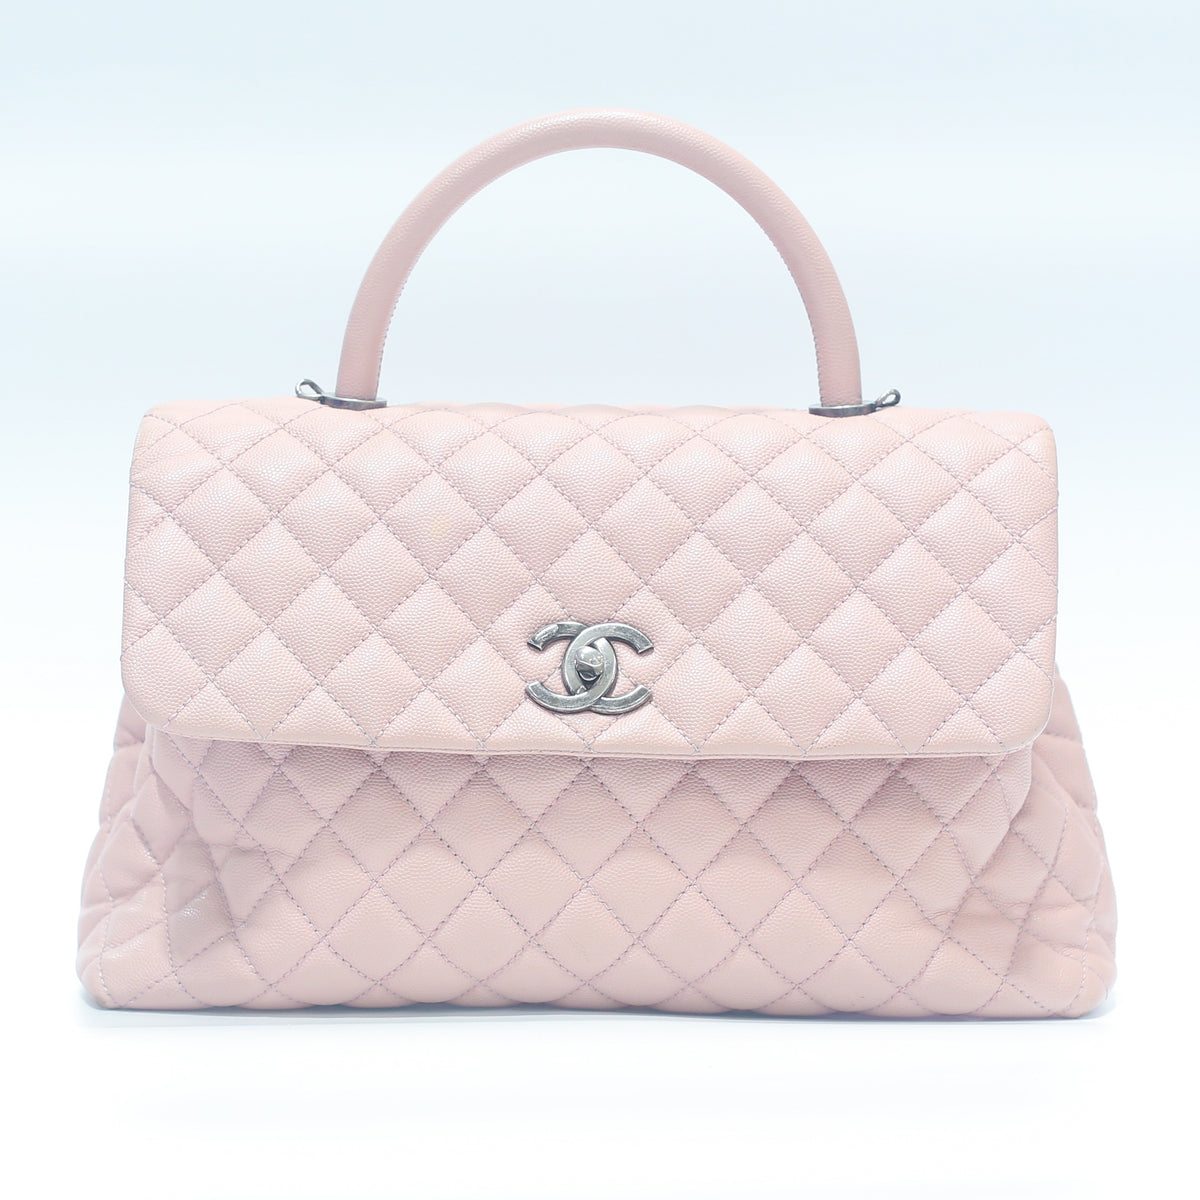 CHANEL White Coco Handle Shoulder Bag Quilted Caviar Leather